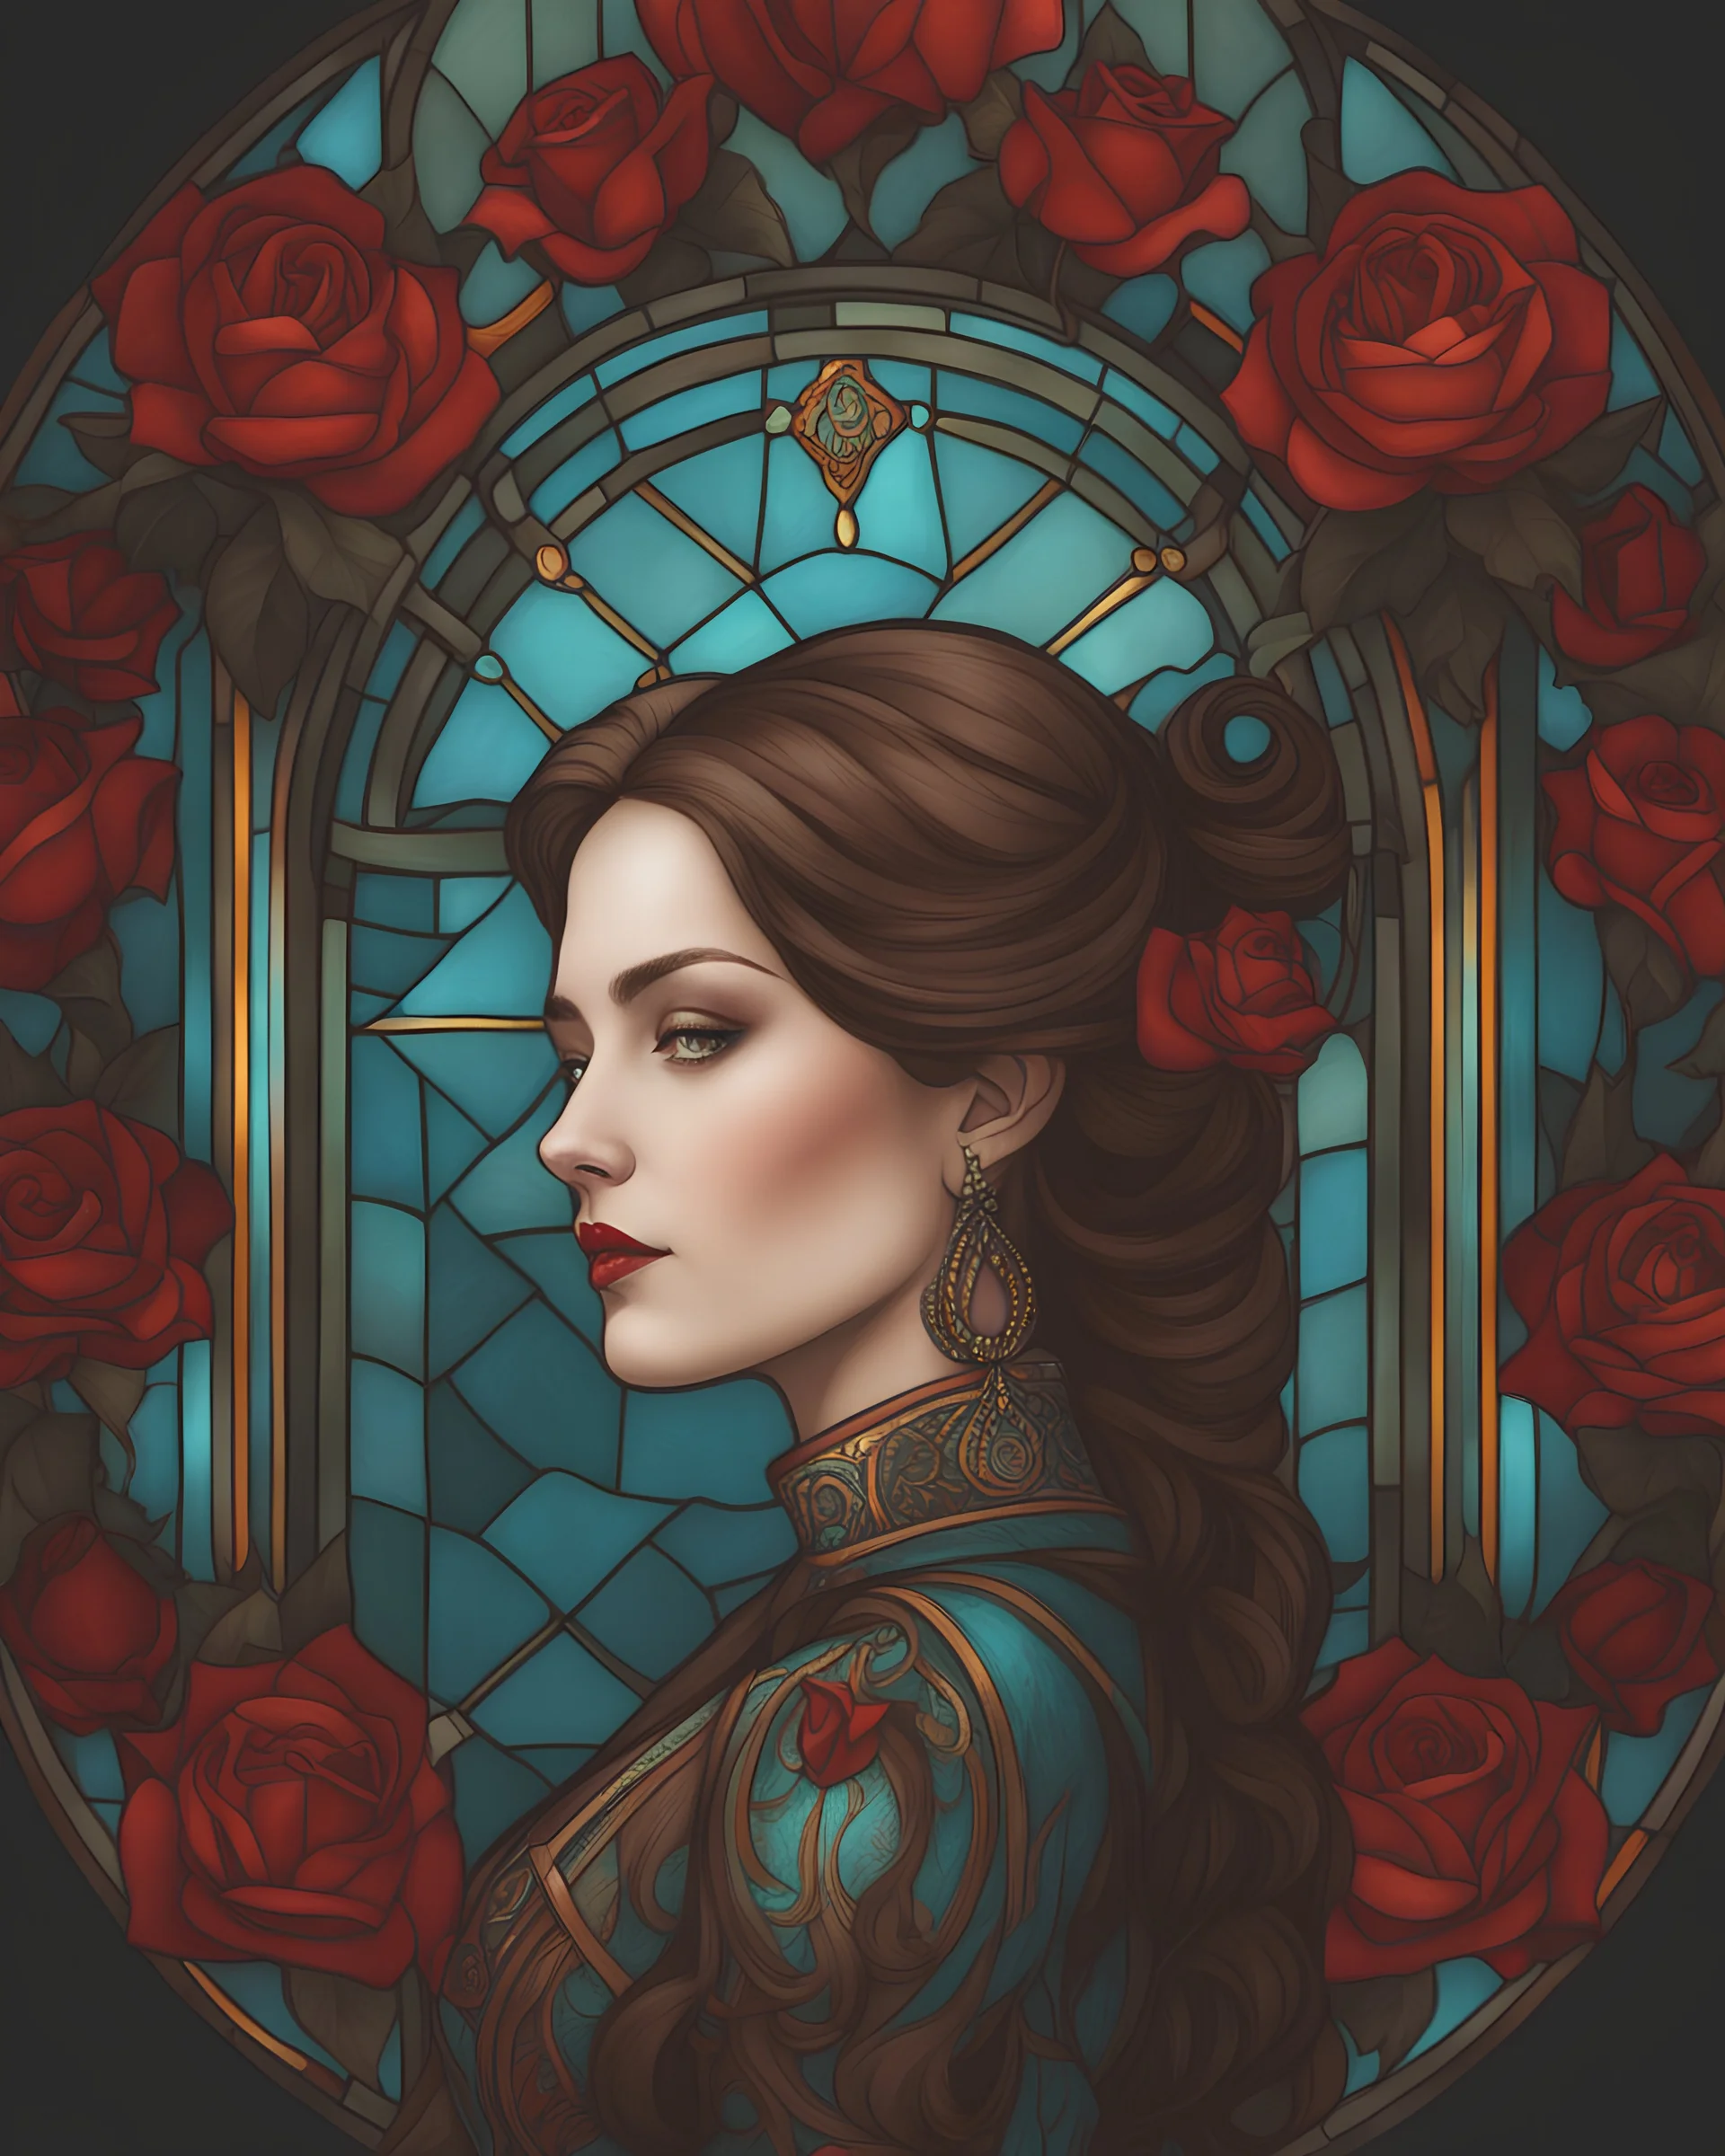 Intricately detailed character illustration resembling stained glass, featuring a woman embellished with (crimson roses:1.3), rendered with an eerie realism, illuminated in enchanting (light cyan and amber hue